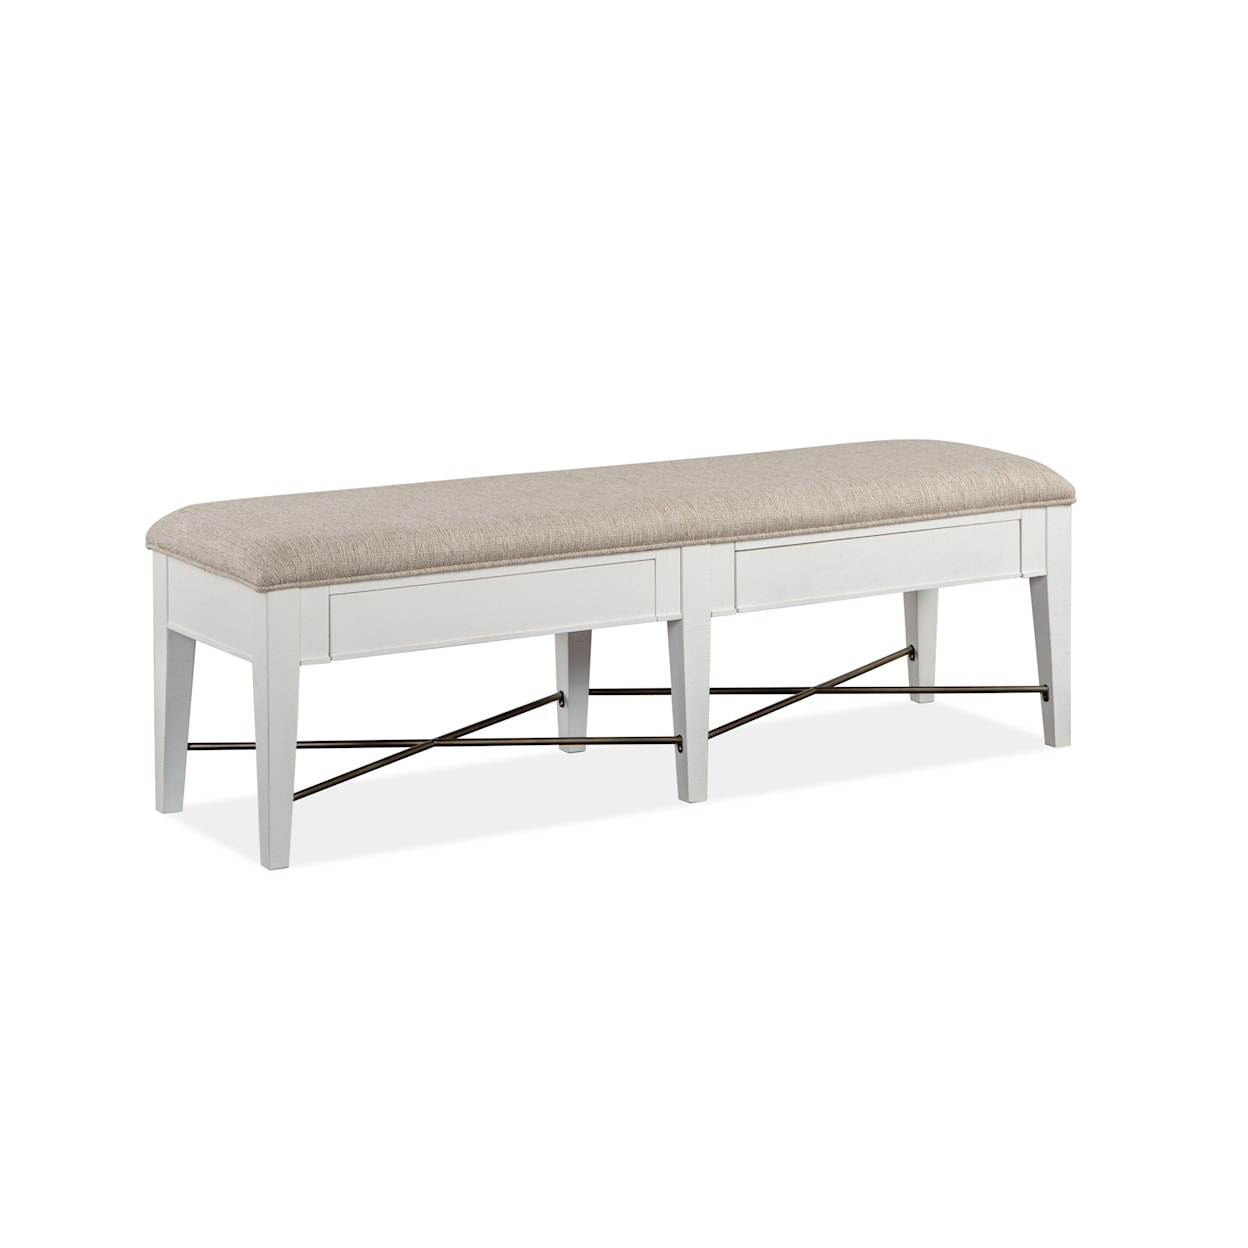 Magnussen Home Heron Cove Dining Upholstered Dining Bench